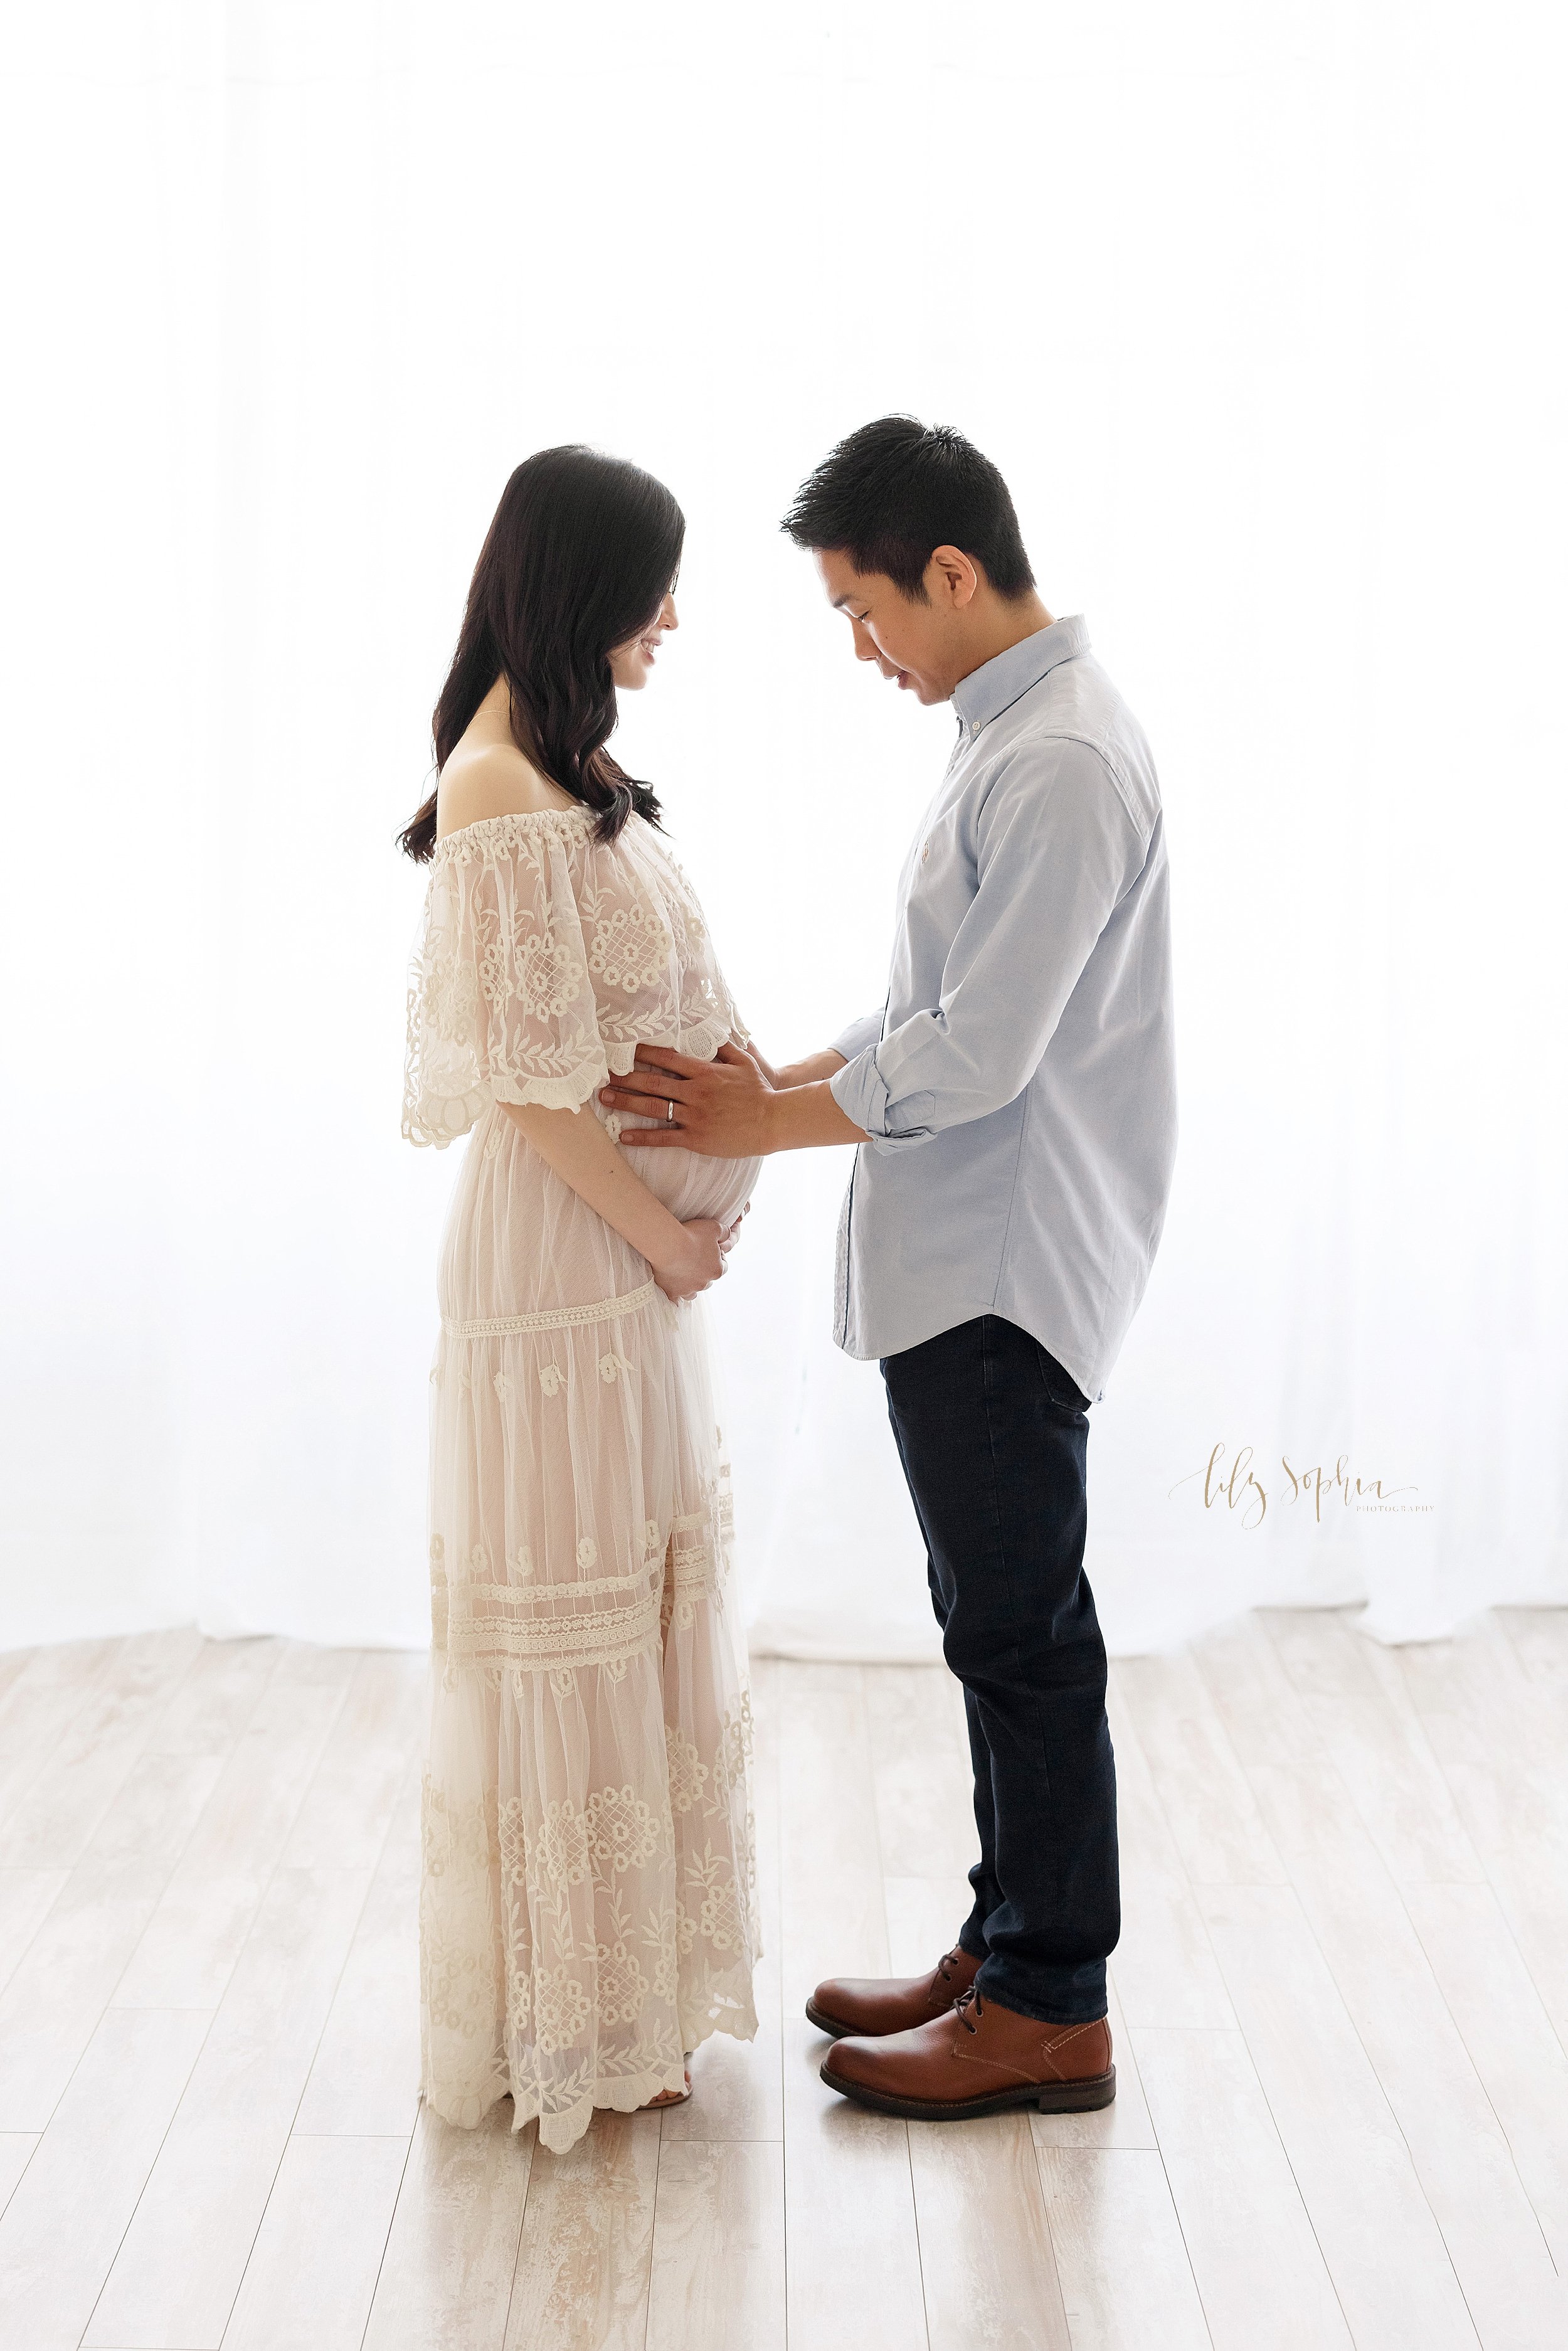  Maternity photo session of an Asian couple with the wife wearing  an off-the-shoulder full-length gown with a lace ruffle bodice as she stands facing her husband with her hands at the base of her belly and her husband with his hands on their child i